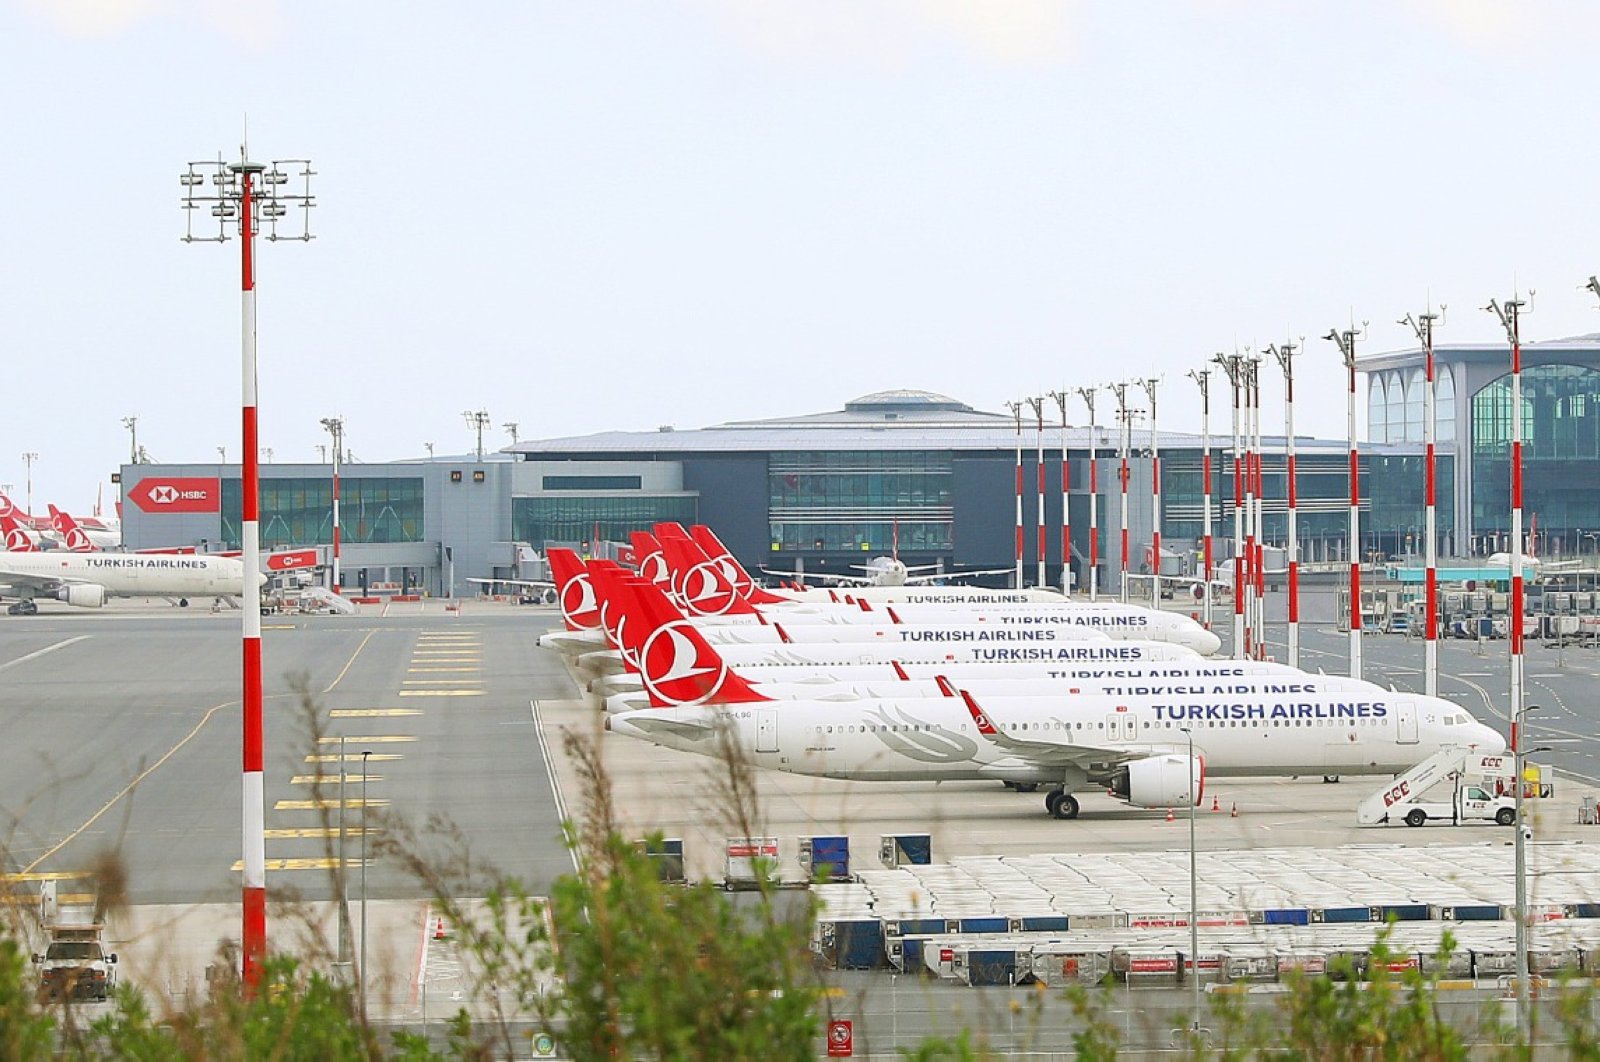 Turkish Airline planes sit on the tarmac at Istanbul Airport during the coronavirus outbreak, Istanbul, May 24, 2020. (AA Photo)